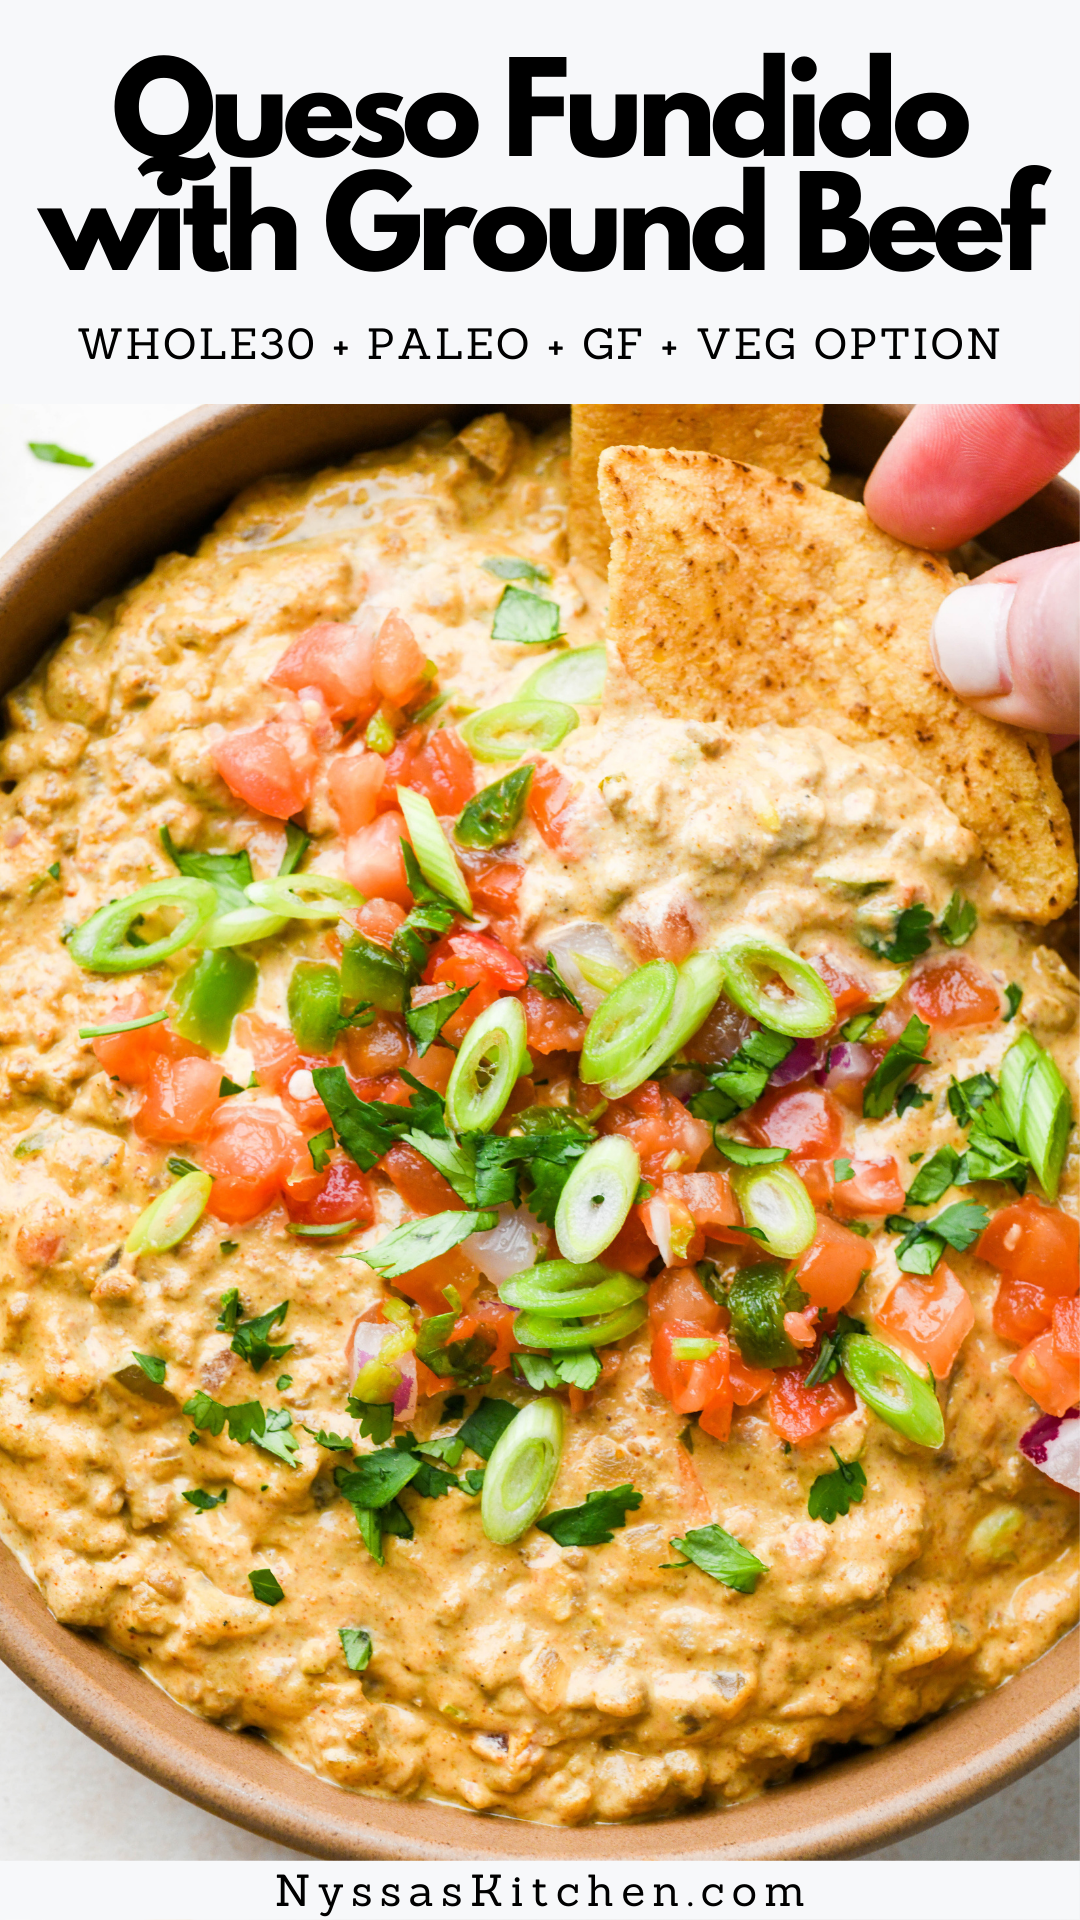 What could be better than dairy free queso fundido with ground beef?! The ultimate snack dip made with warm cashew cheese, crispy ground beef, smoky spices, and pico de gallo for a pop of bright, zippy flavor. No dairy means this version is Whole30 compatible, paleo, and gluten free. Can also be made vegan if you swap the meat for a meatless crumble!